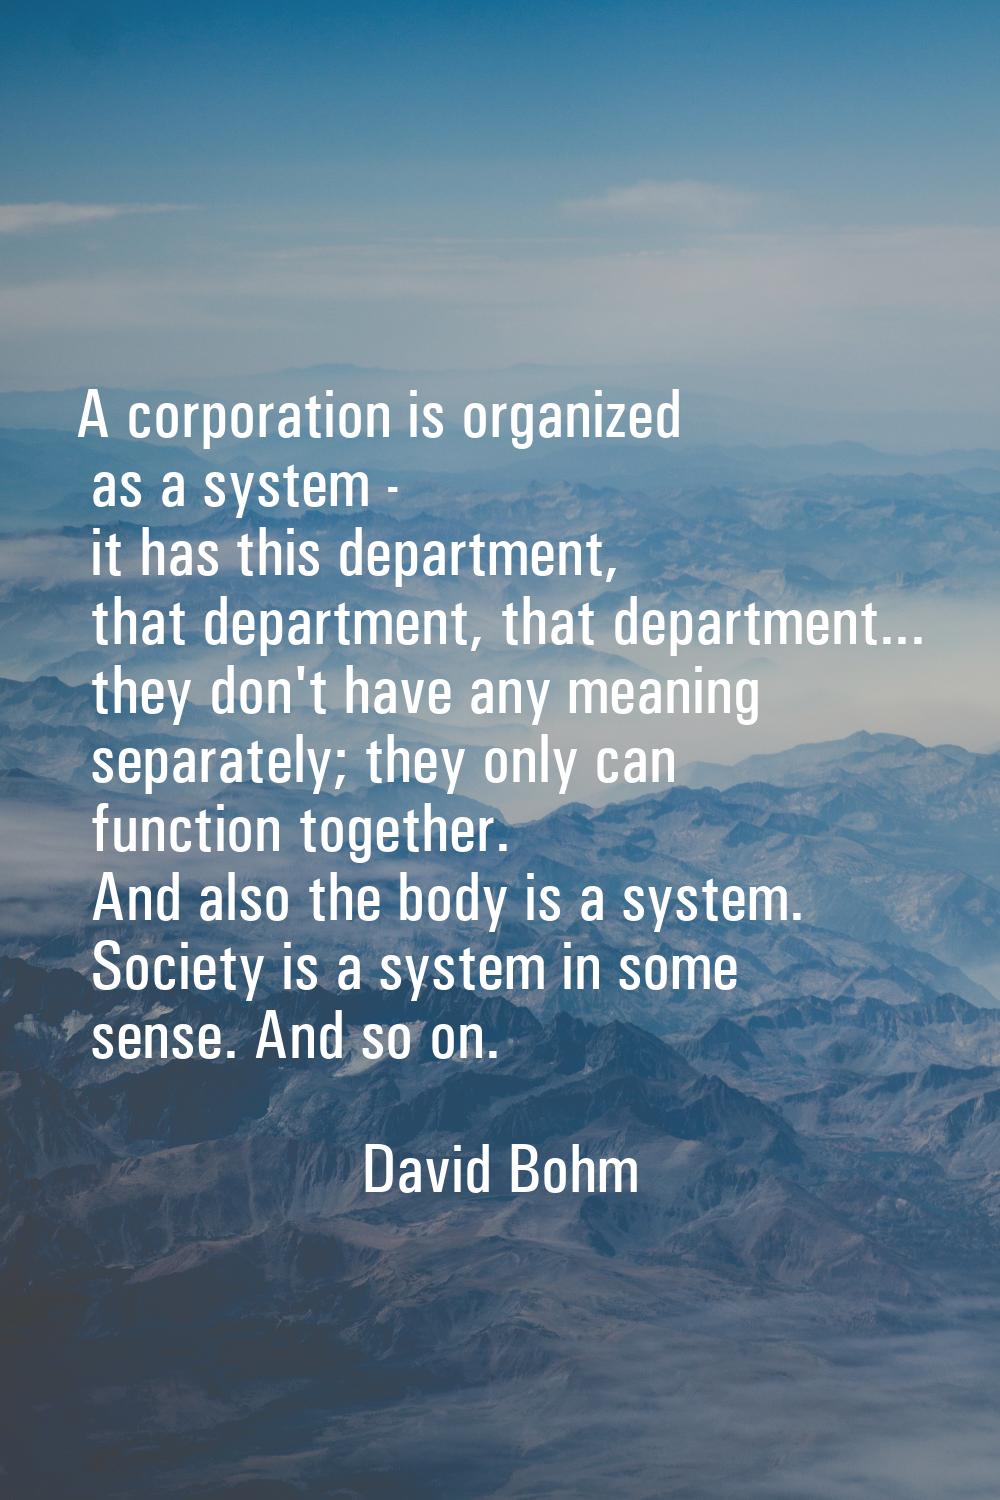 A corporation is organized as a system - it has this department, that department, that department..